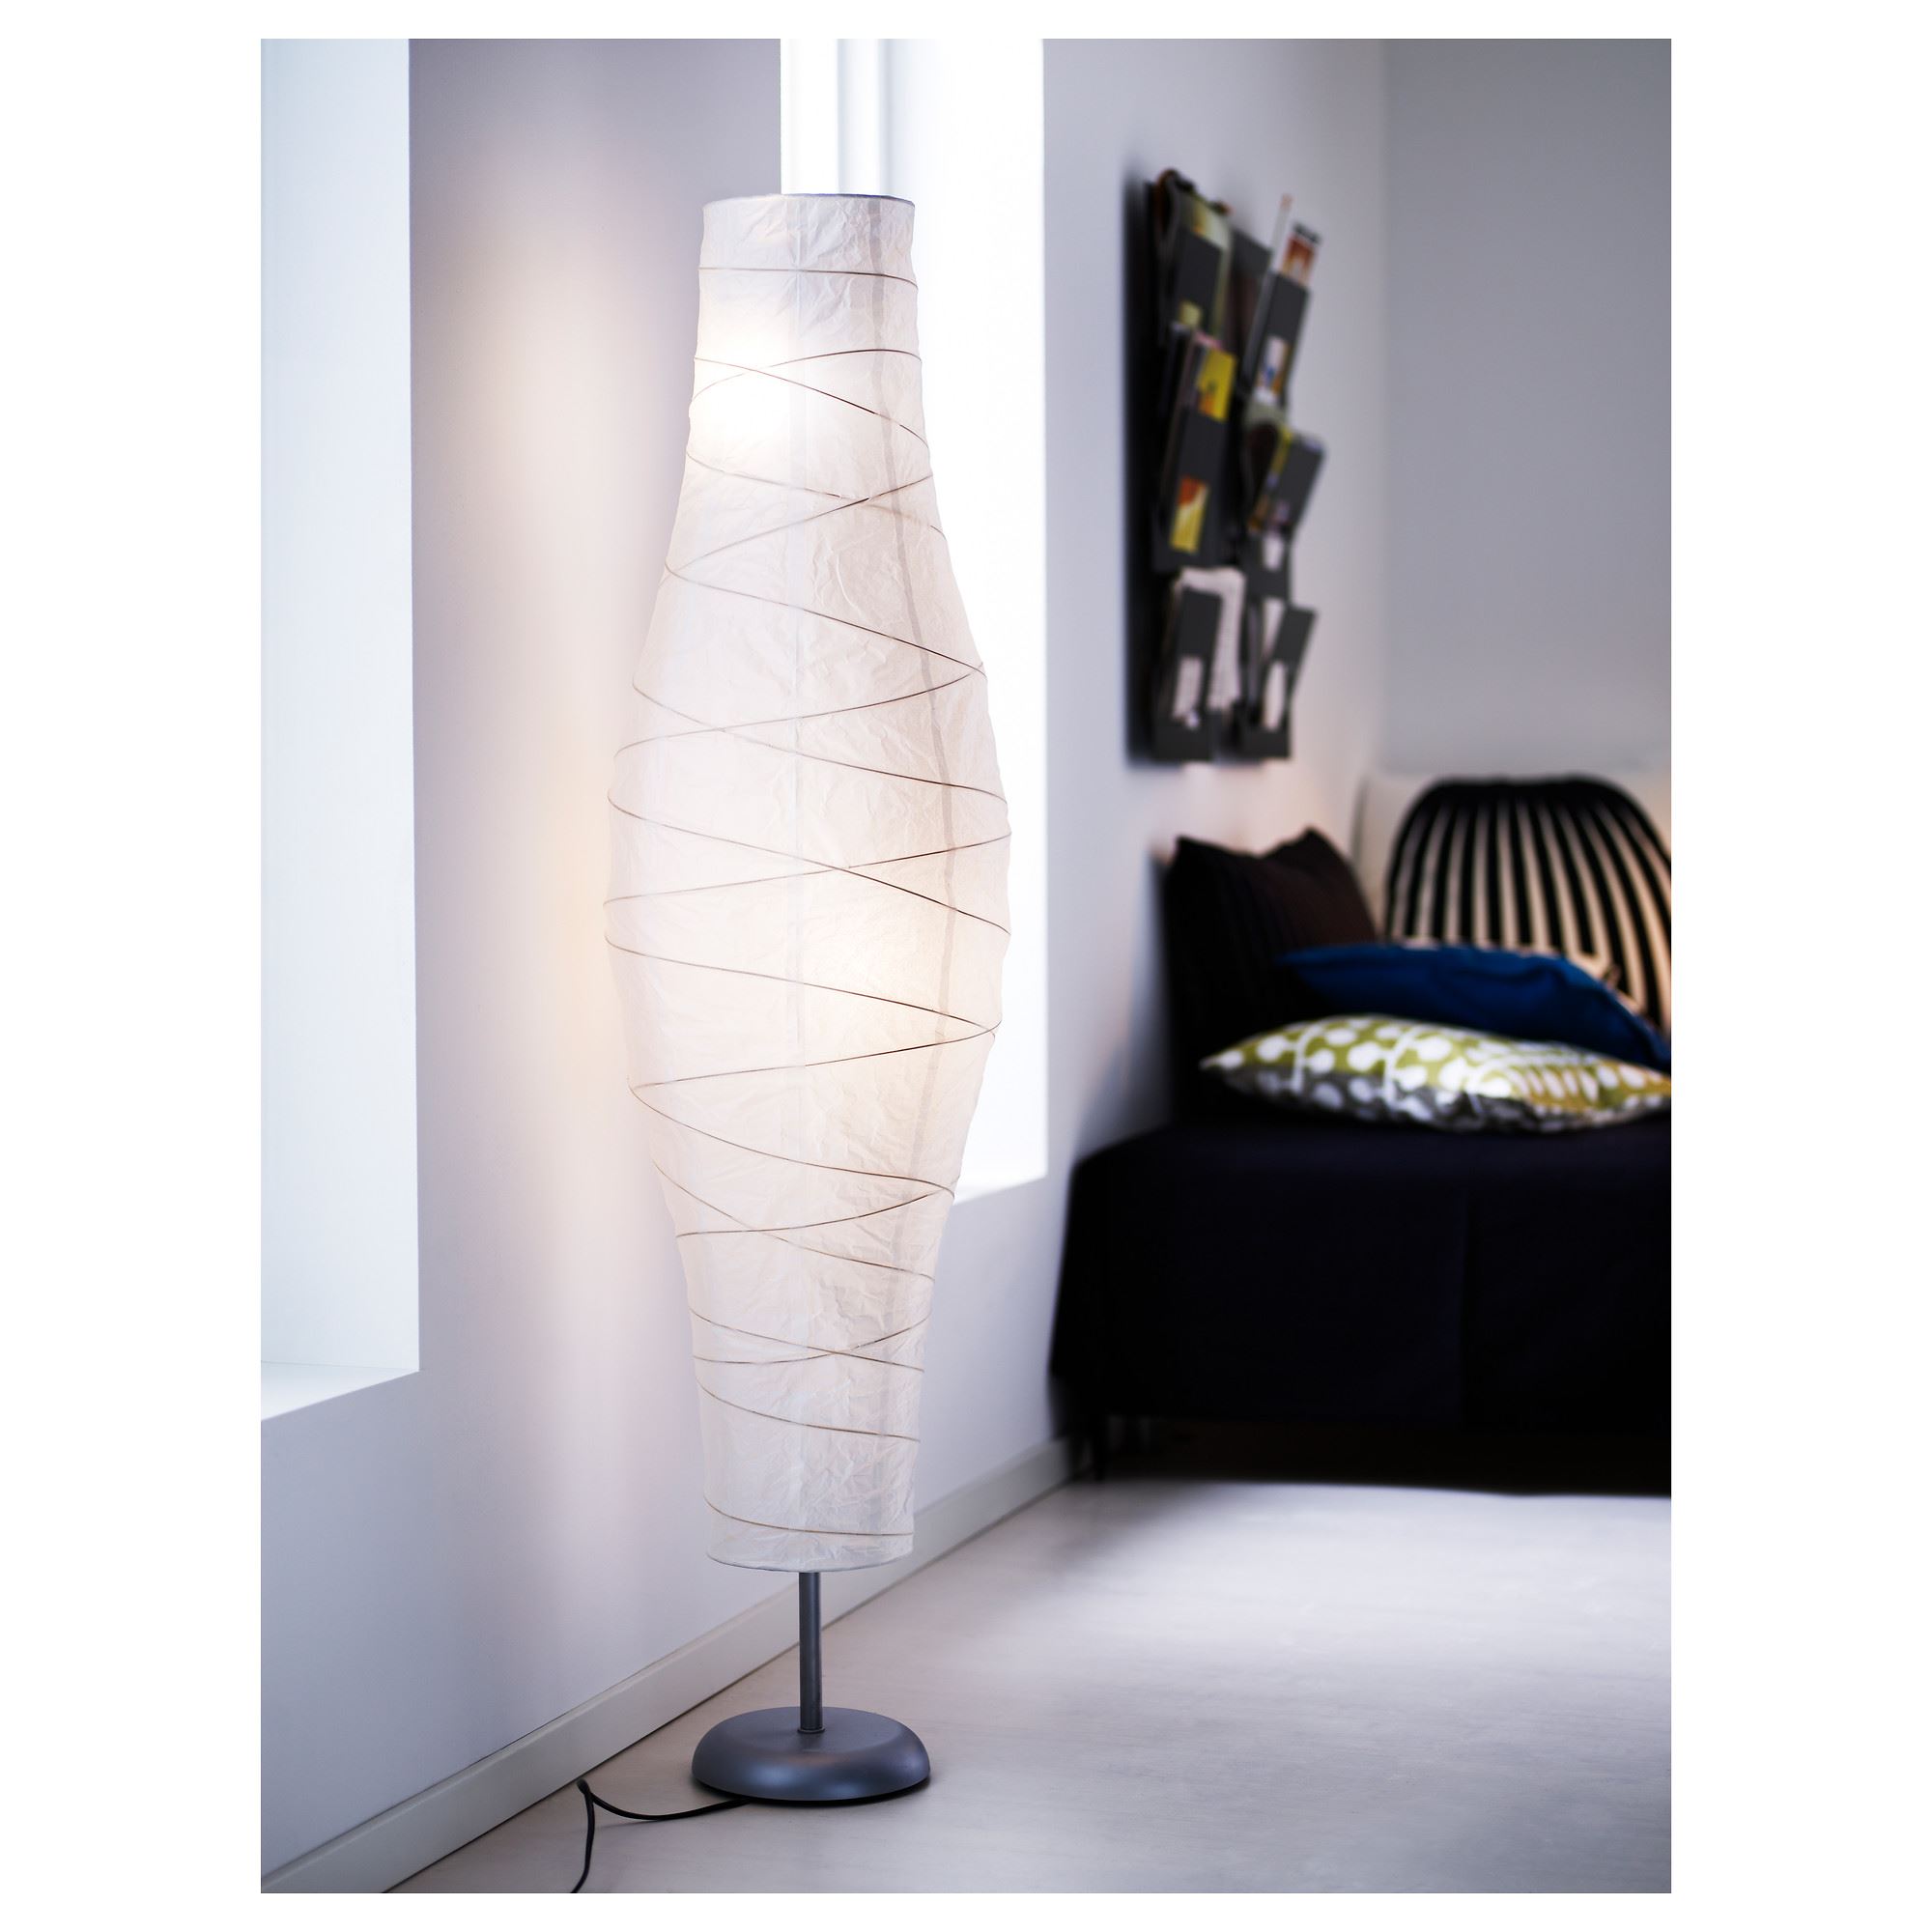 Ikea Dudero Floor Lamp Silver White Gives A Soft Mood Light For Sale Online Ebay